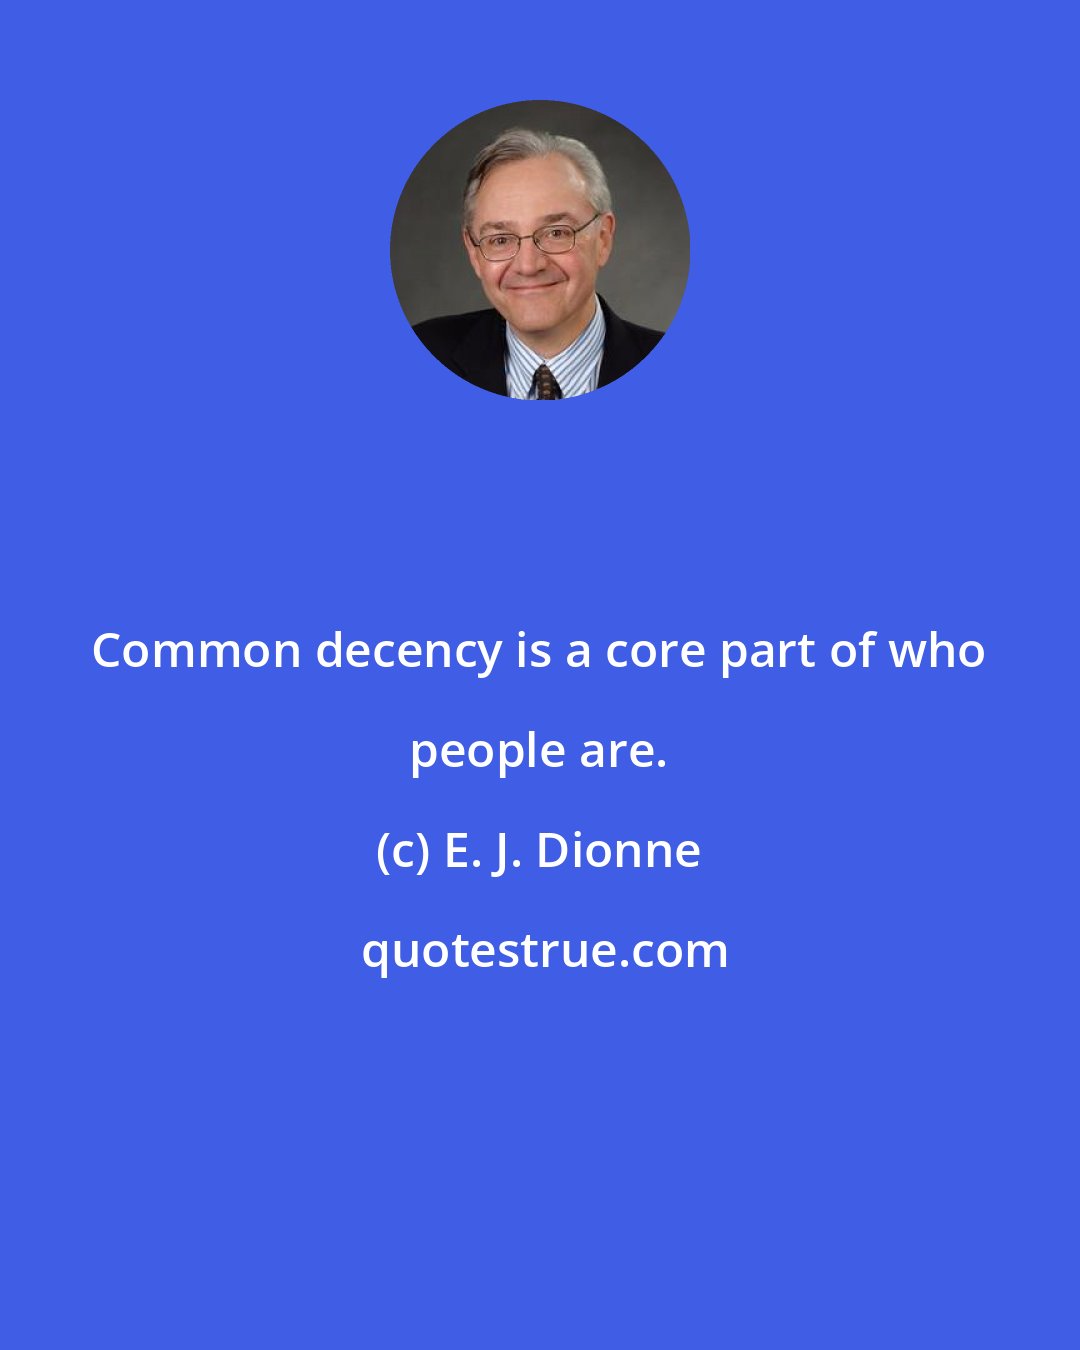 E. J. Dionne: Common decency is a core part of who people are.